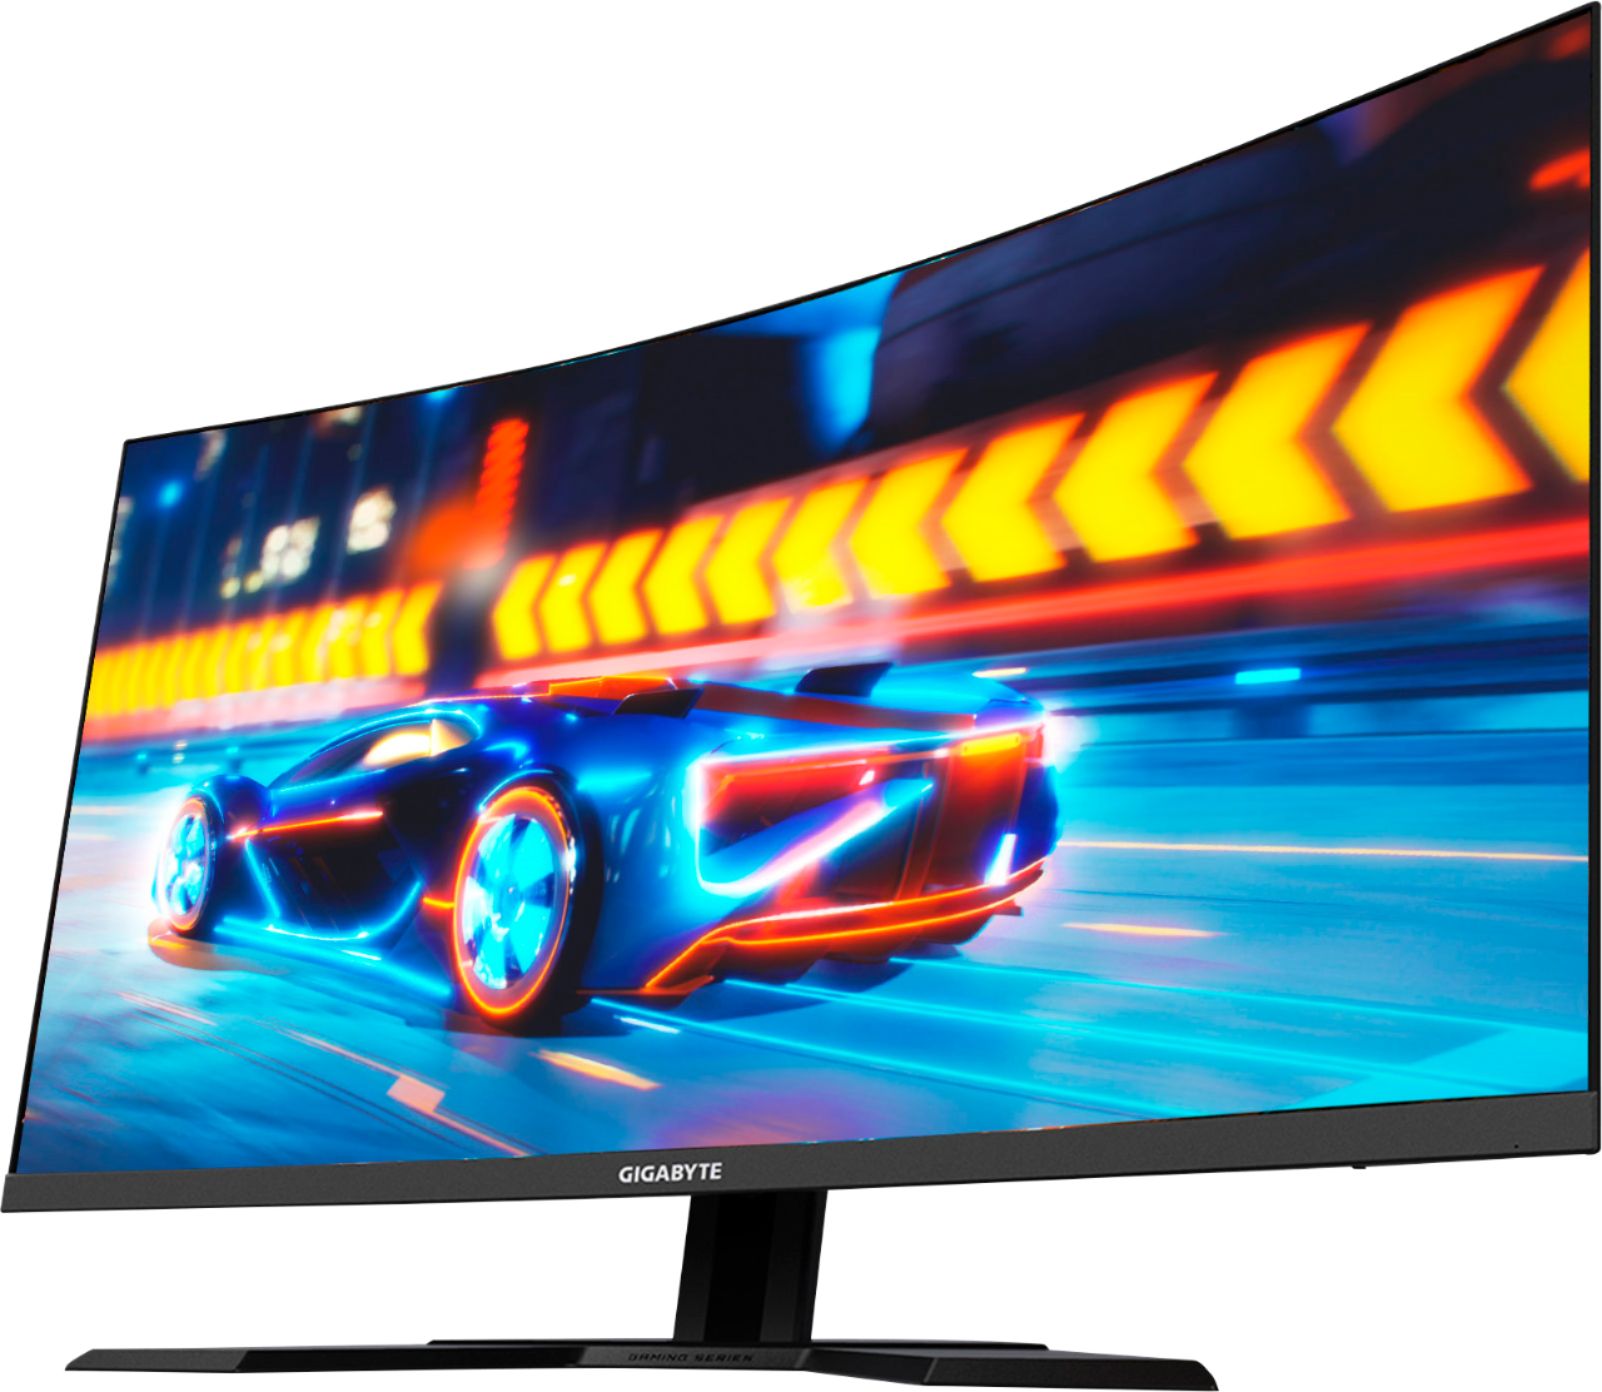 Angle View: GIGABYTE - 32" LED Curved QHD FreeSync Monitor with HDR (HDMI, DisplayPort, USB) - Black